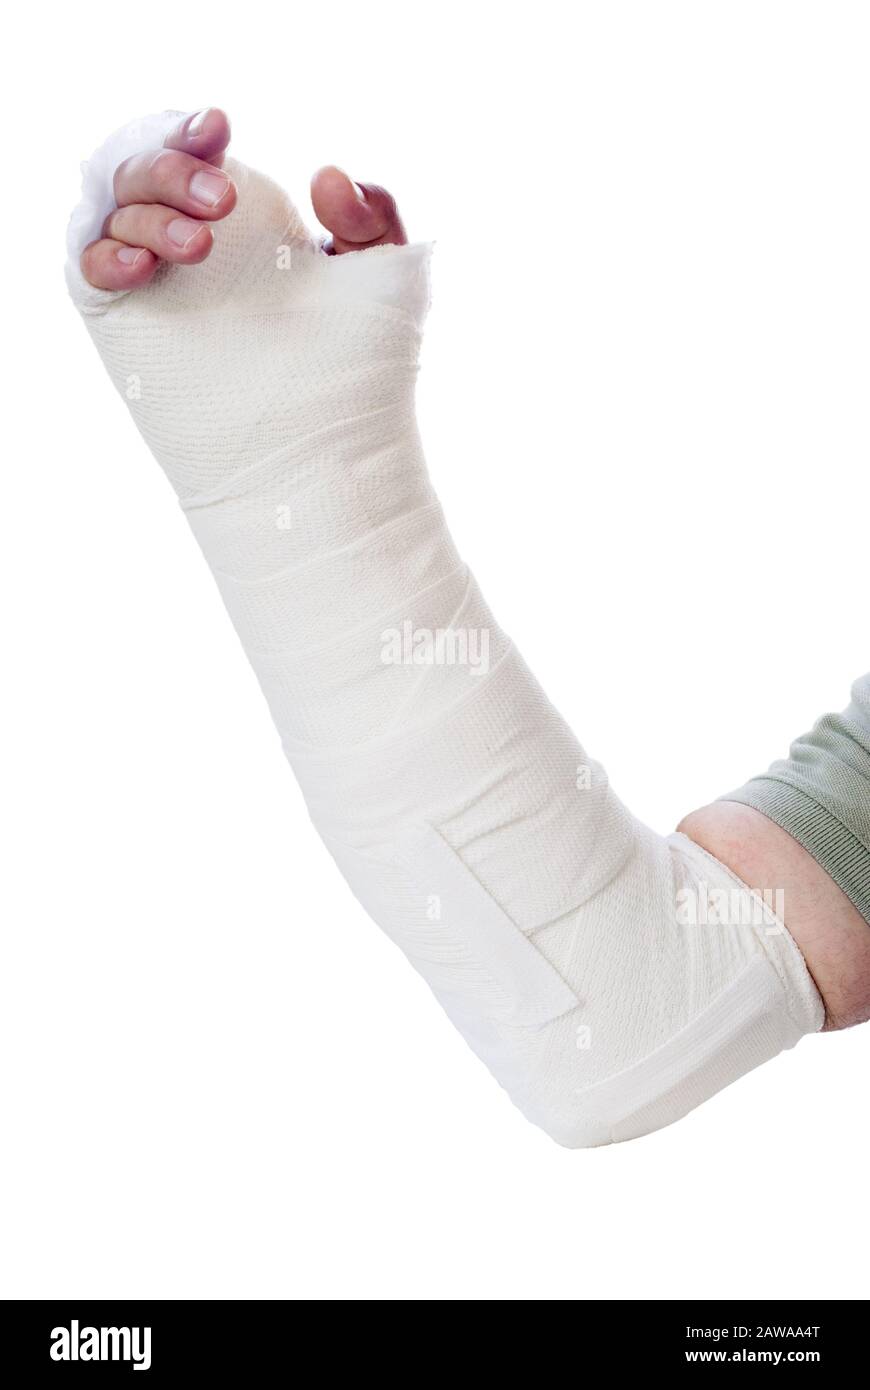 Side view of a man with a broken arm in a splint and cast. His fingers are discolored and swollen. Isolated on white background. Stock Photo